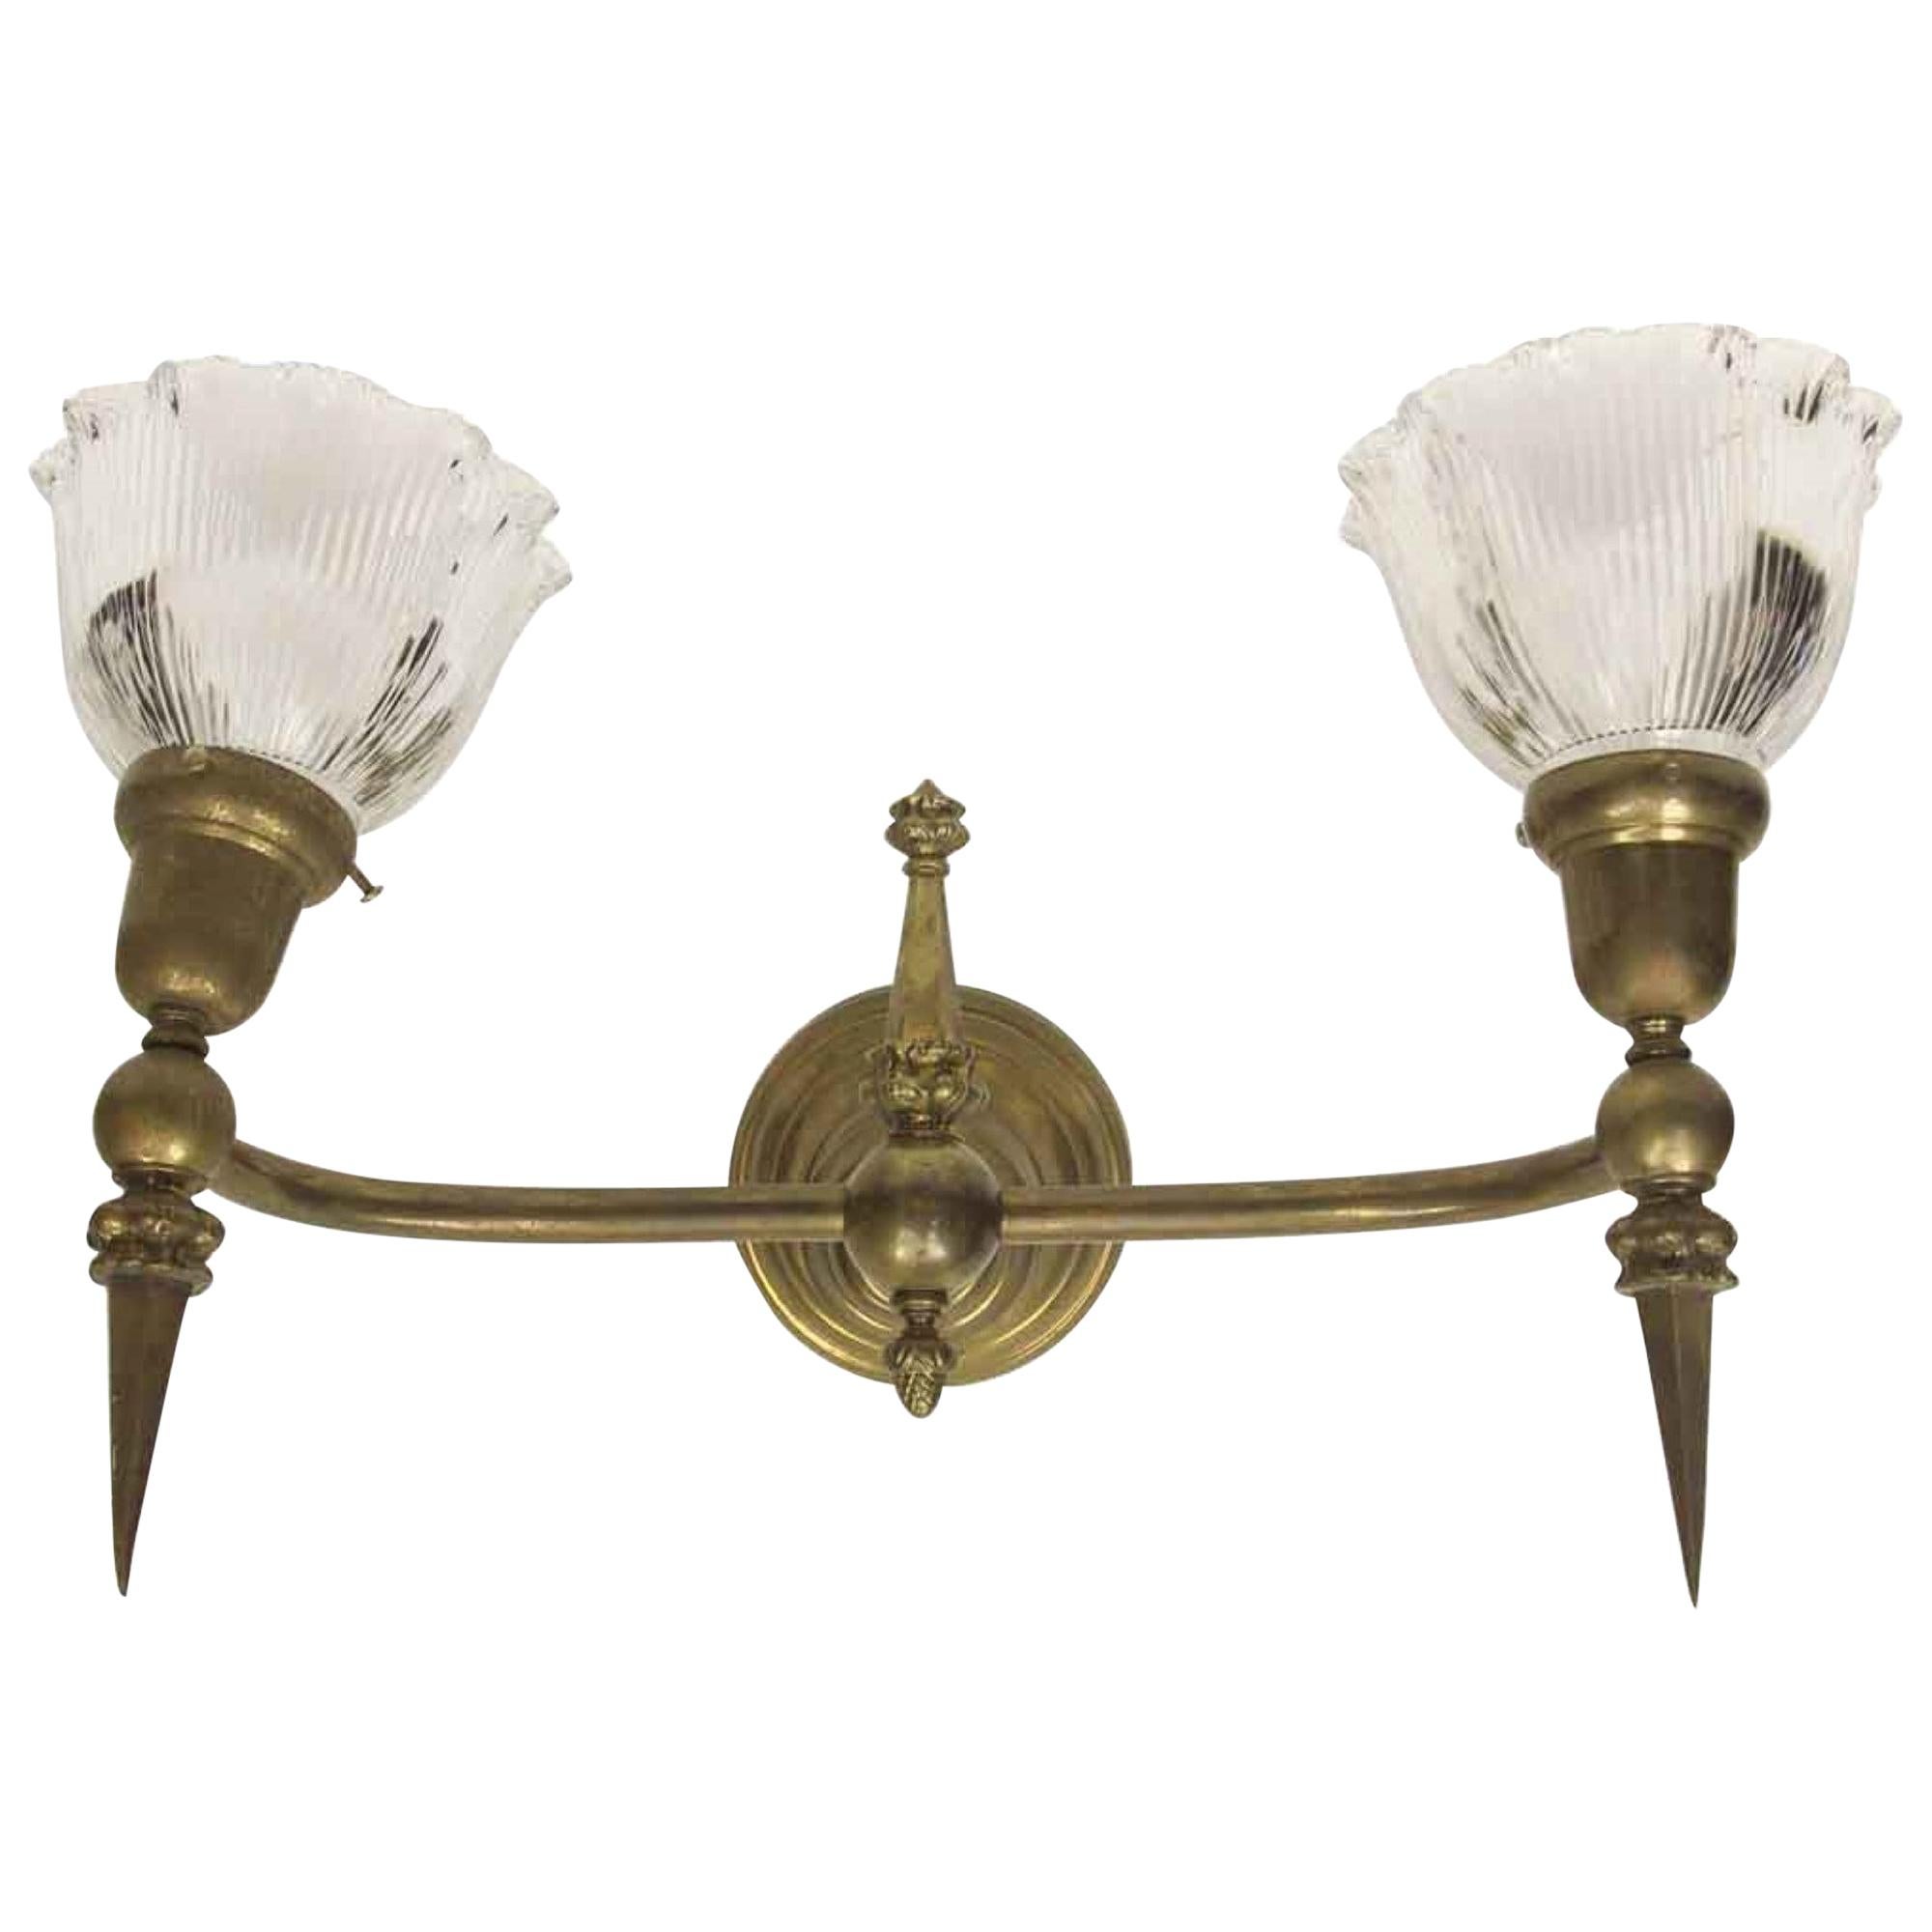 1910s Large Brass Glass Wall Sconce 2 Lights Each Original Shades For Sale